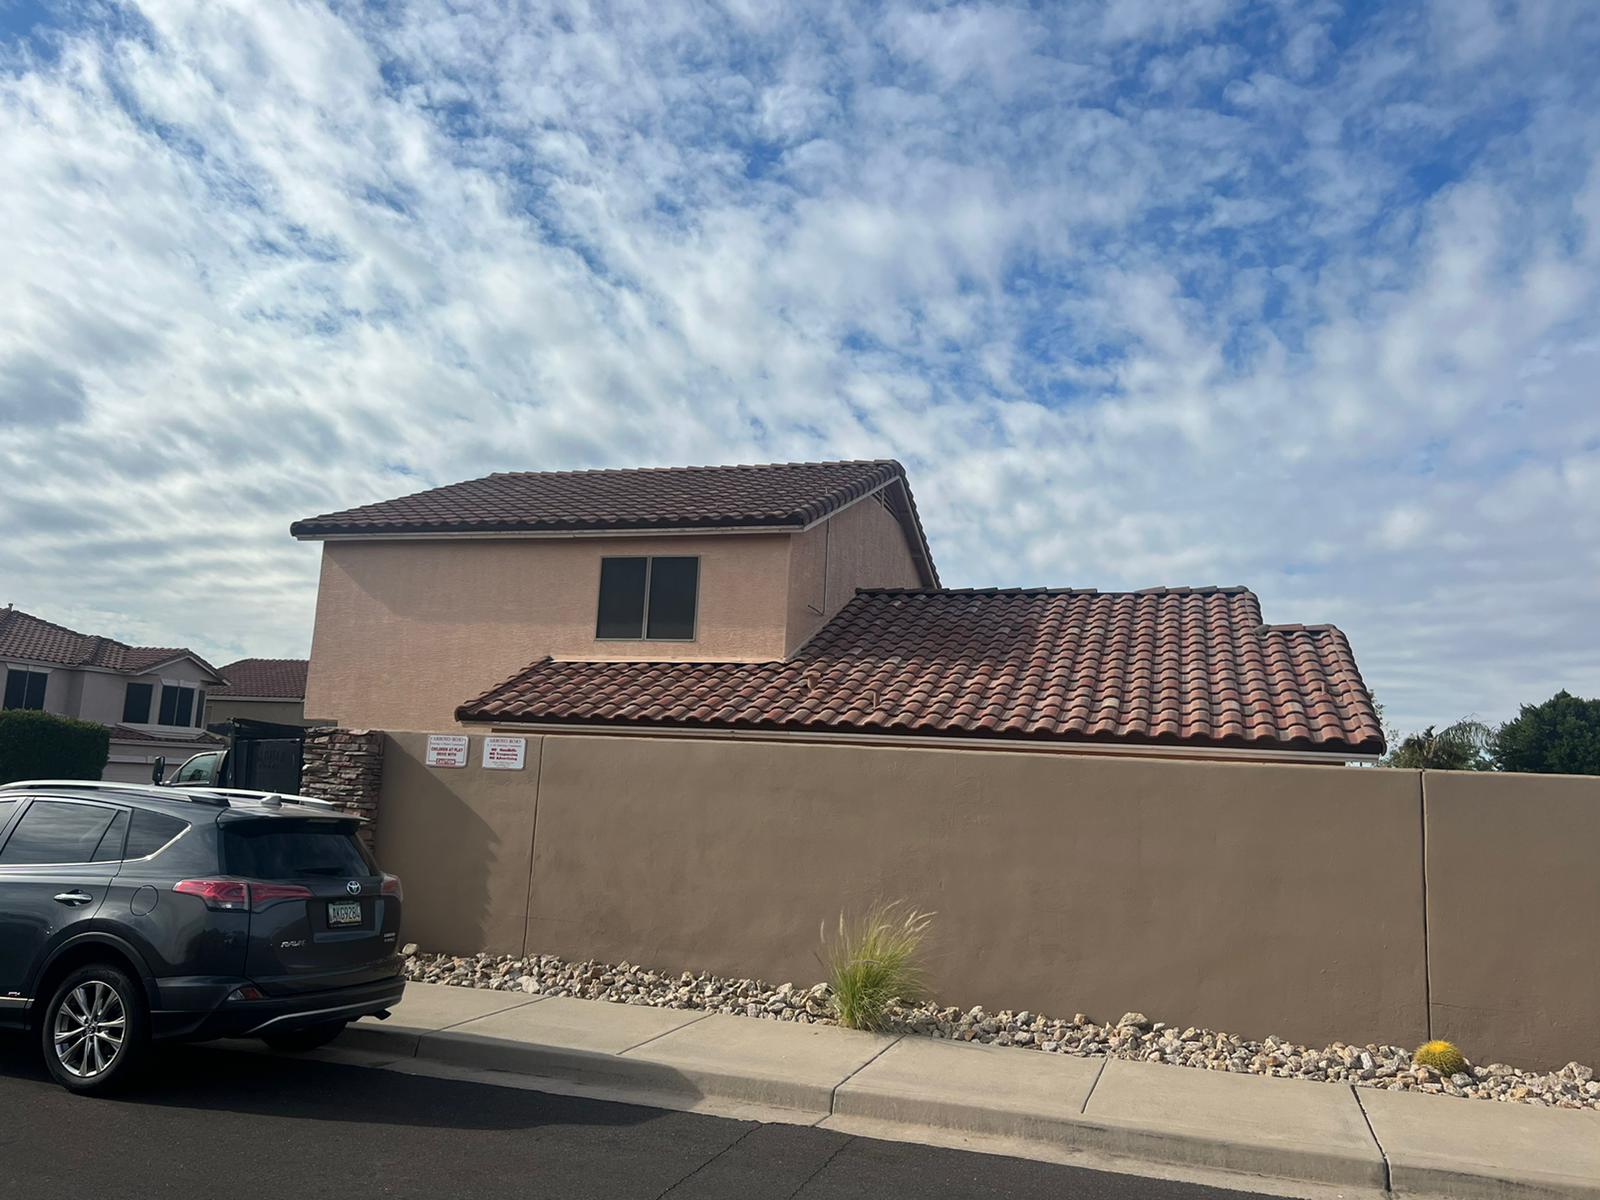 Side view highlighting a roof in Tempe slated for tile replacement.